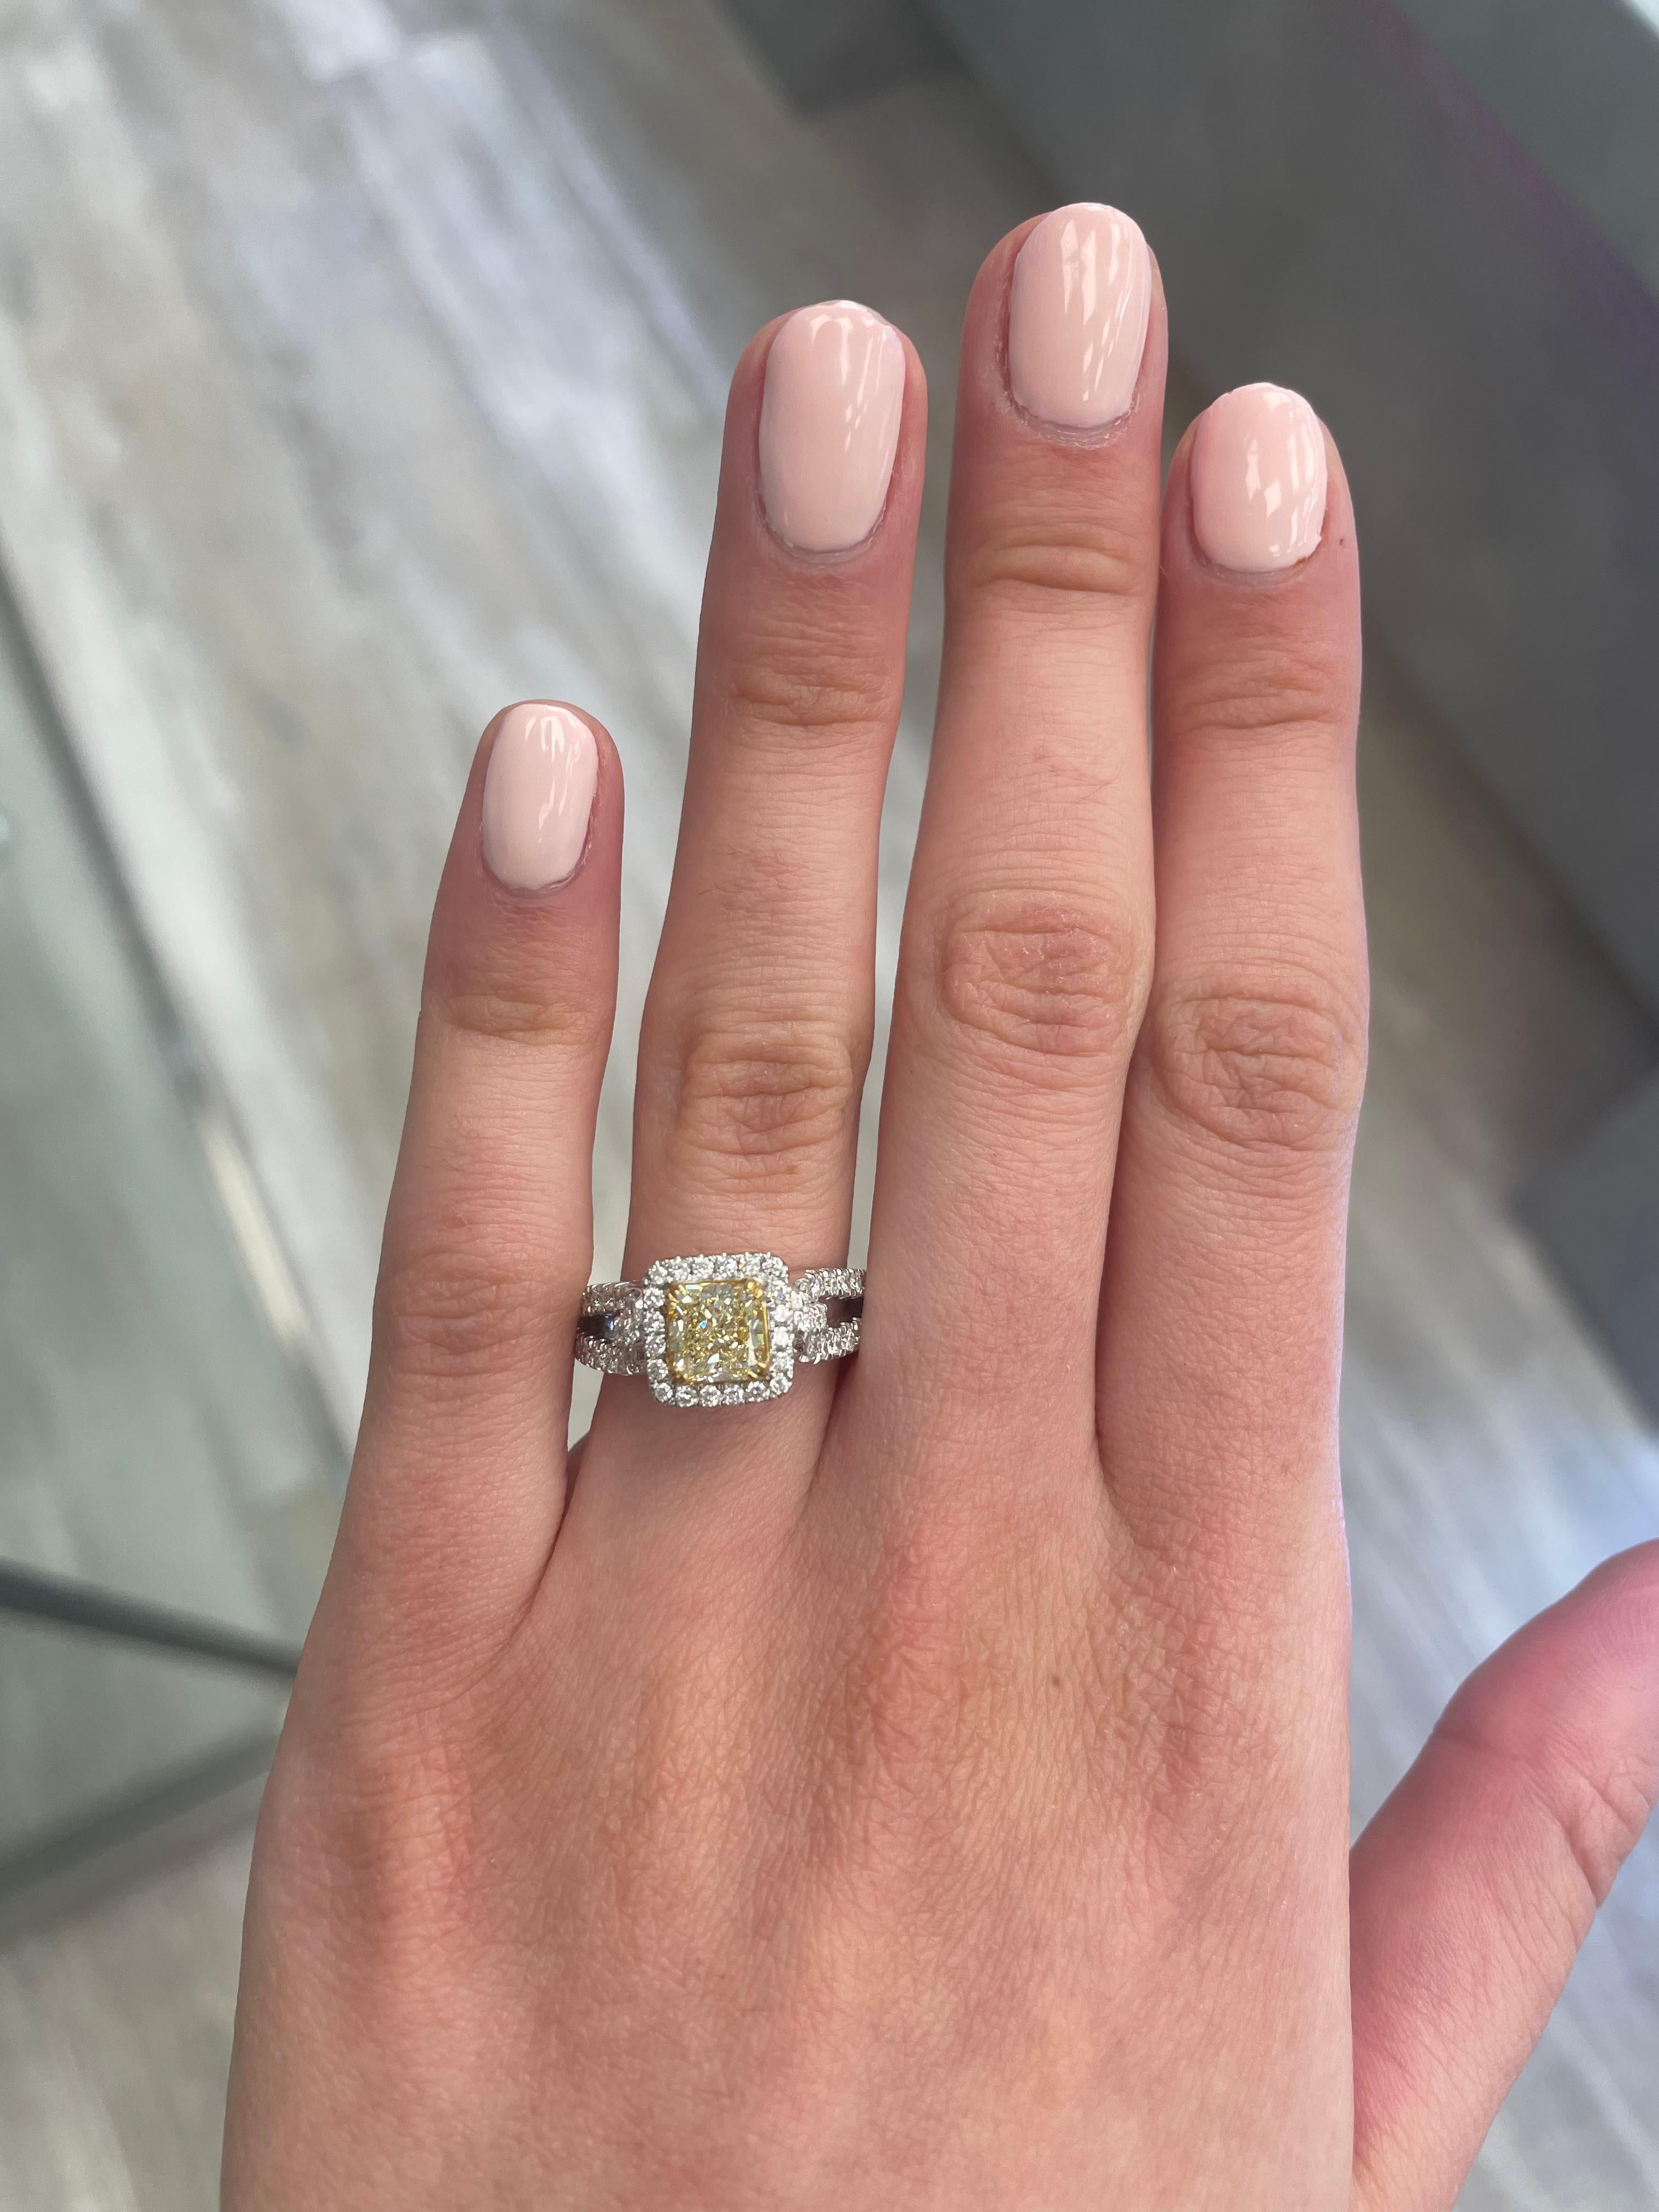 Stunning modern EGL certified yellow diamond with halo ring, two-tone 18k yellow and white gold, split shank. By Alexander Beverly Hills
1.97 carats total diamond weight.
1.19 carat radiant cut Fancy Intense Yellow color and SI1 clarity diamond, EGL